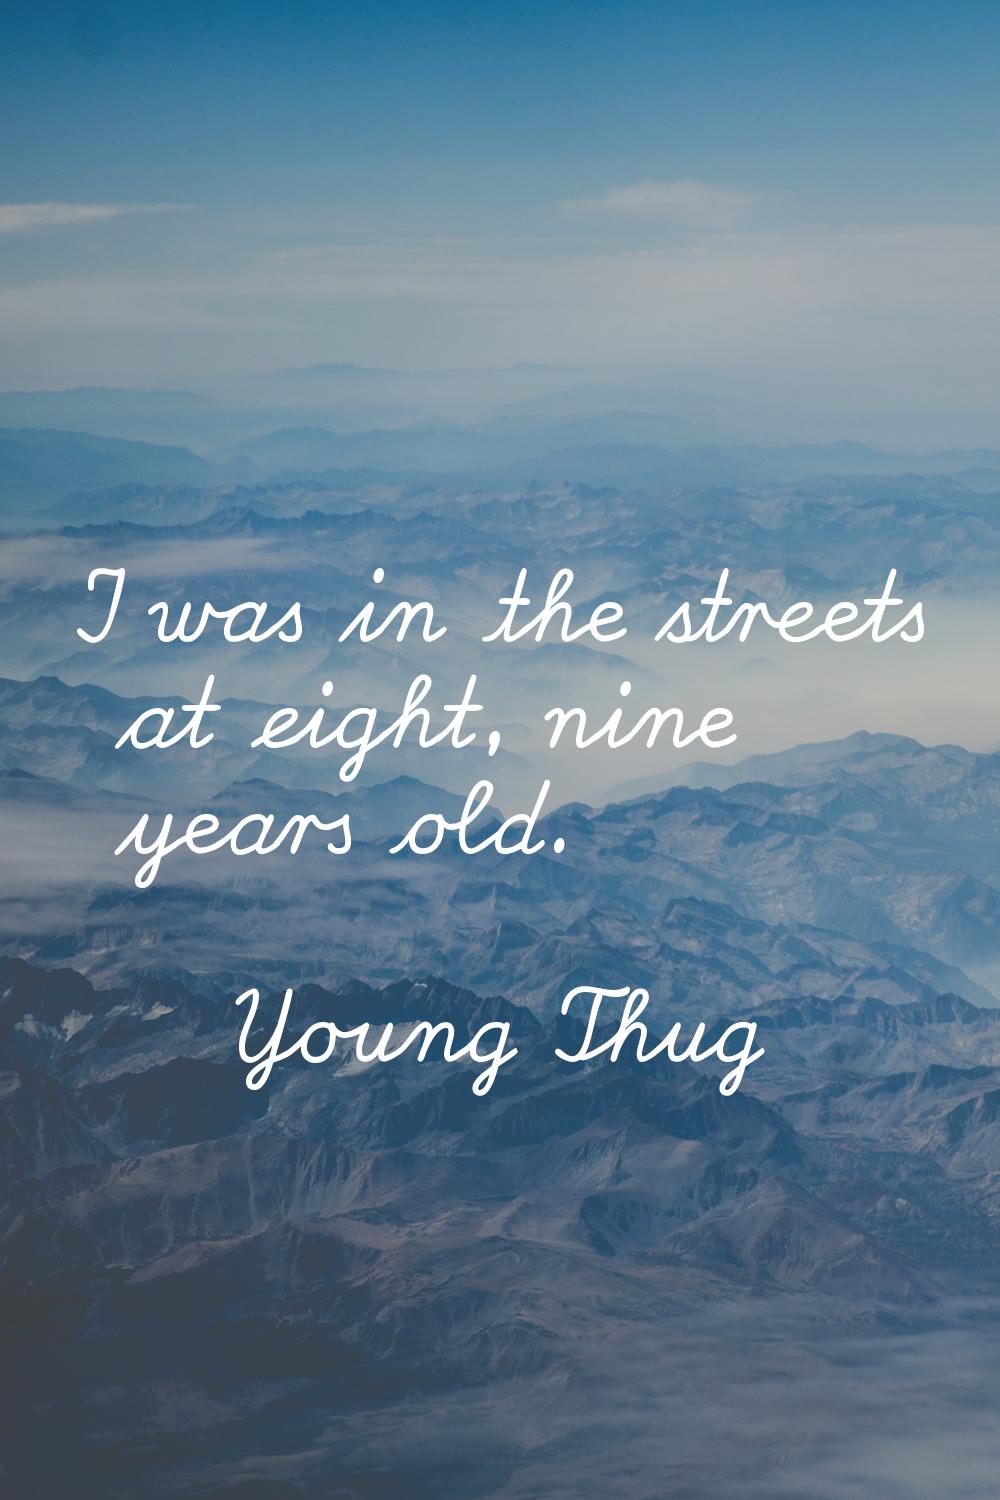 I was in the streets at eight, nine years old.